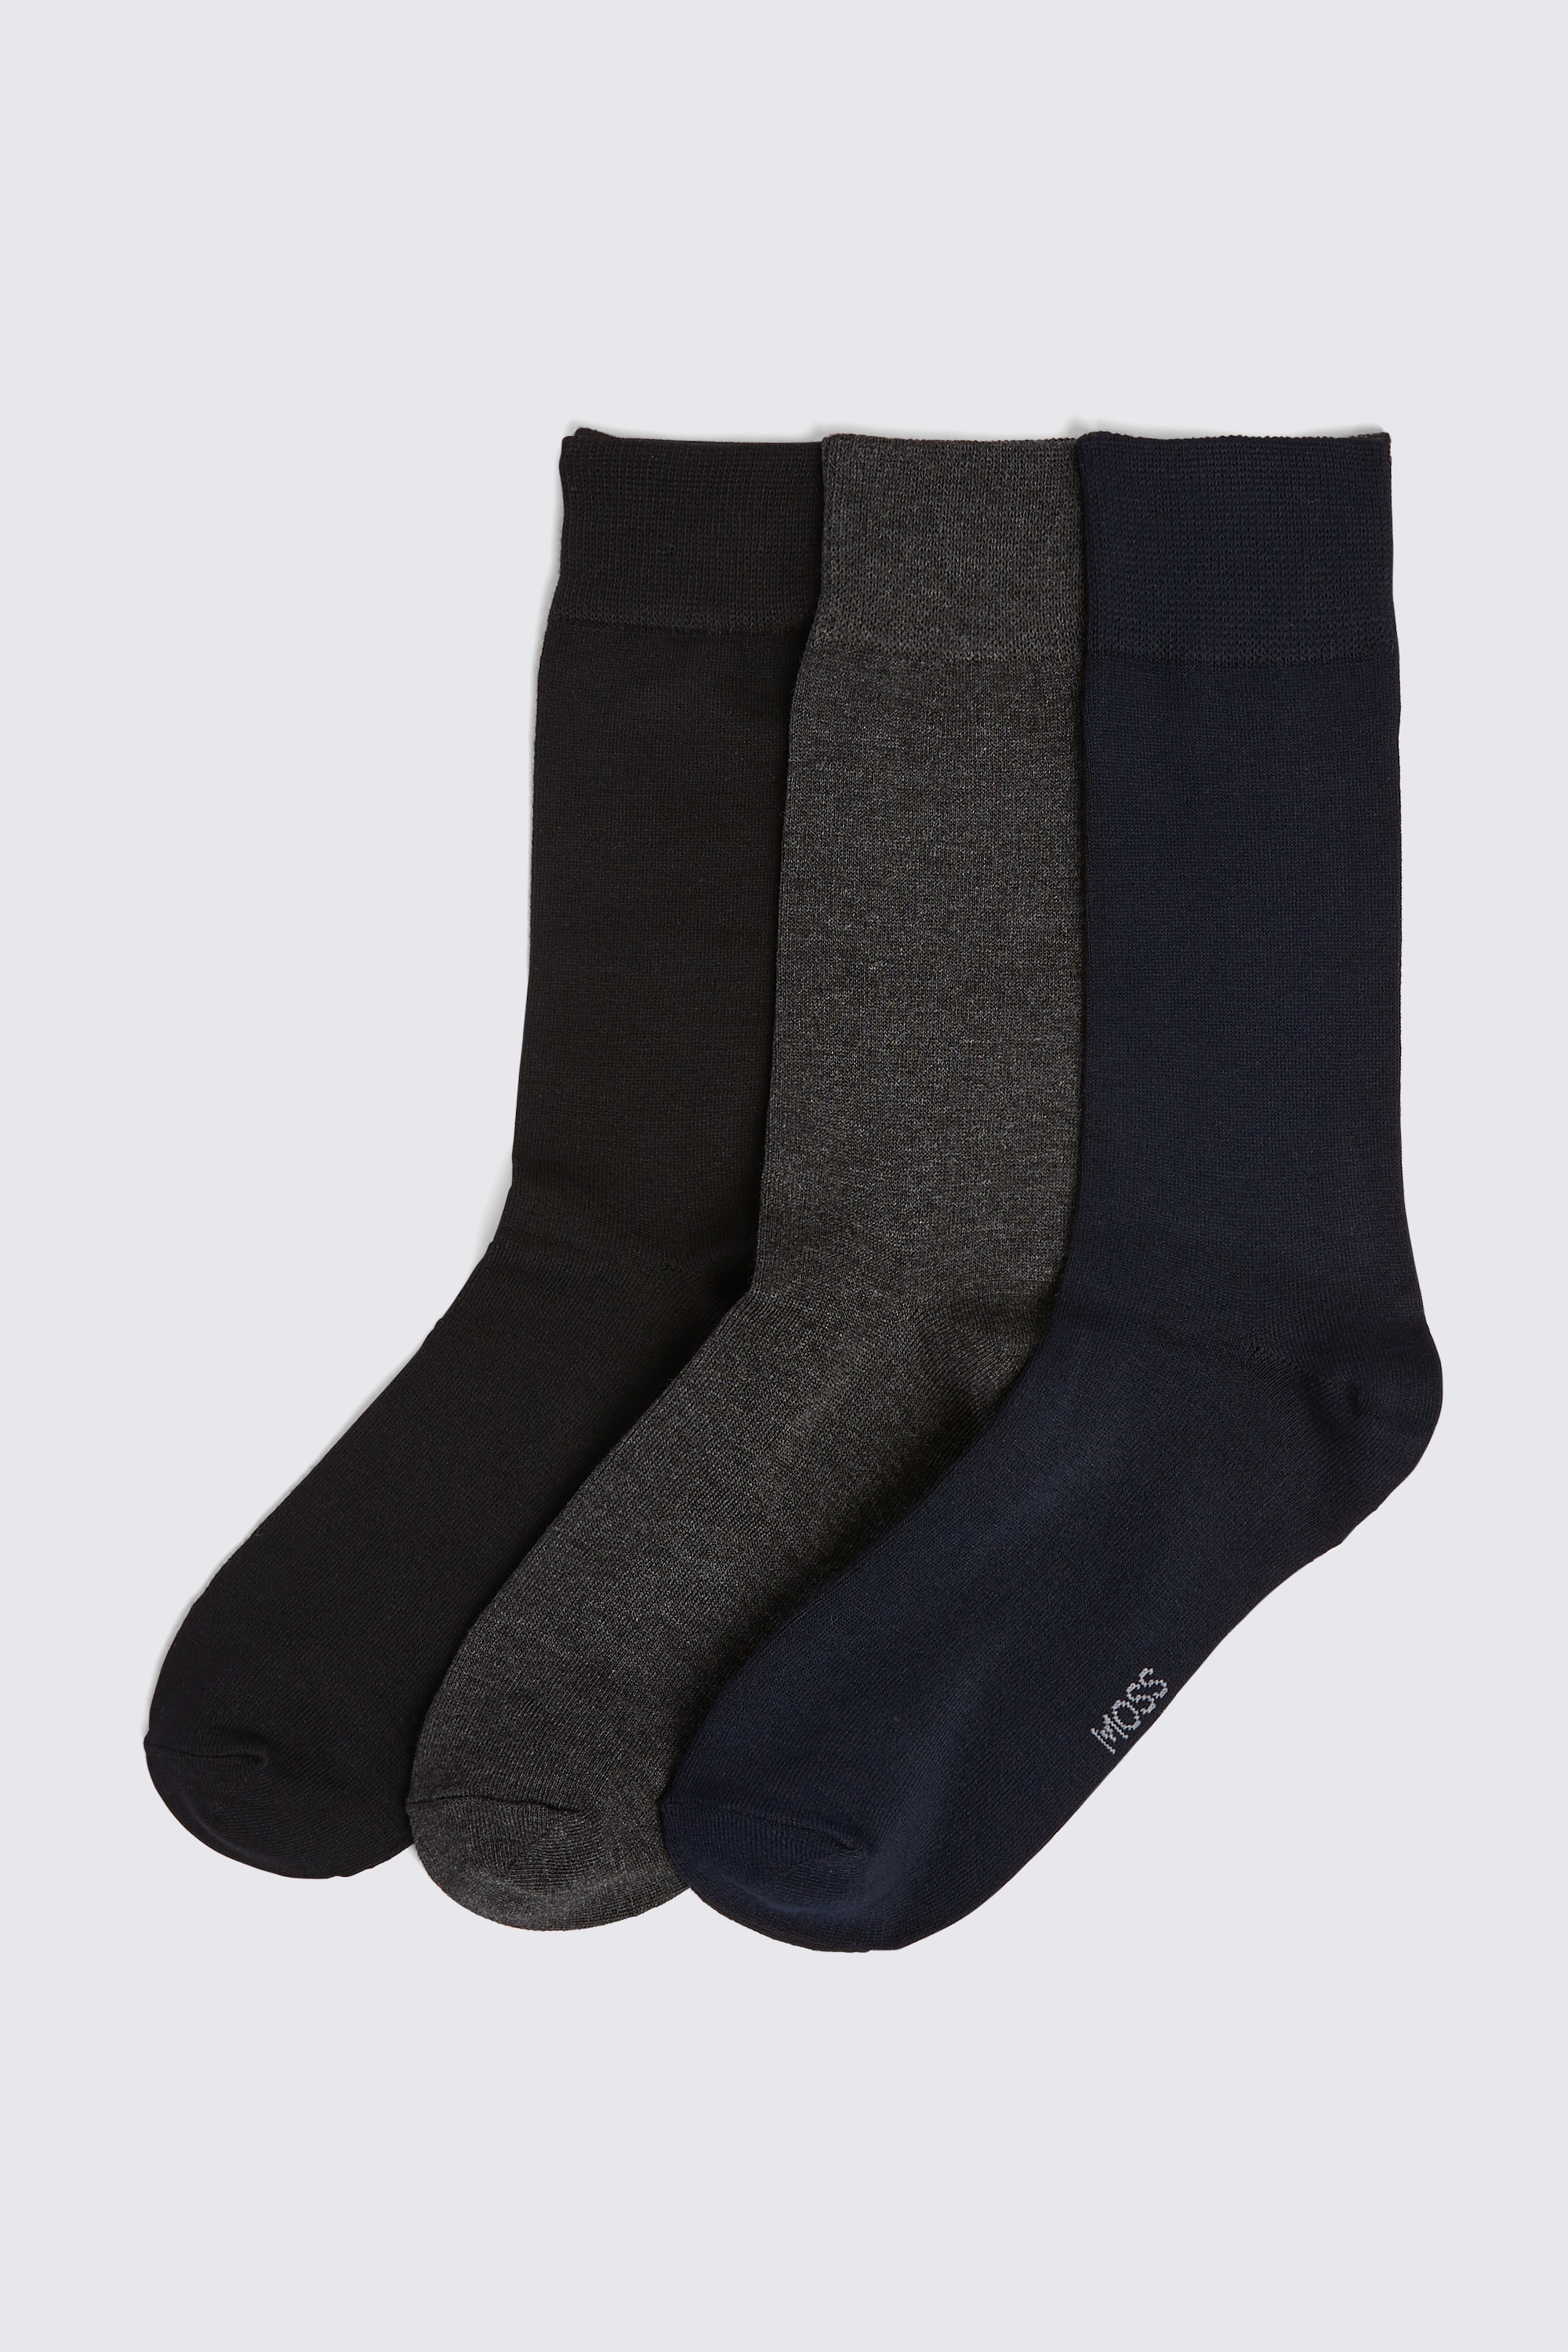 Black, Navy & Charcoal 3-Pack Bamboo Socks | Buy Online at Moss